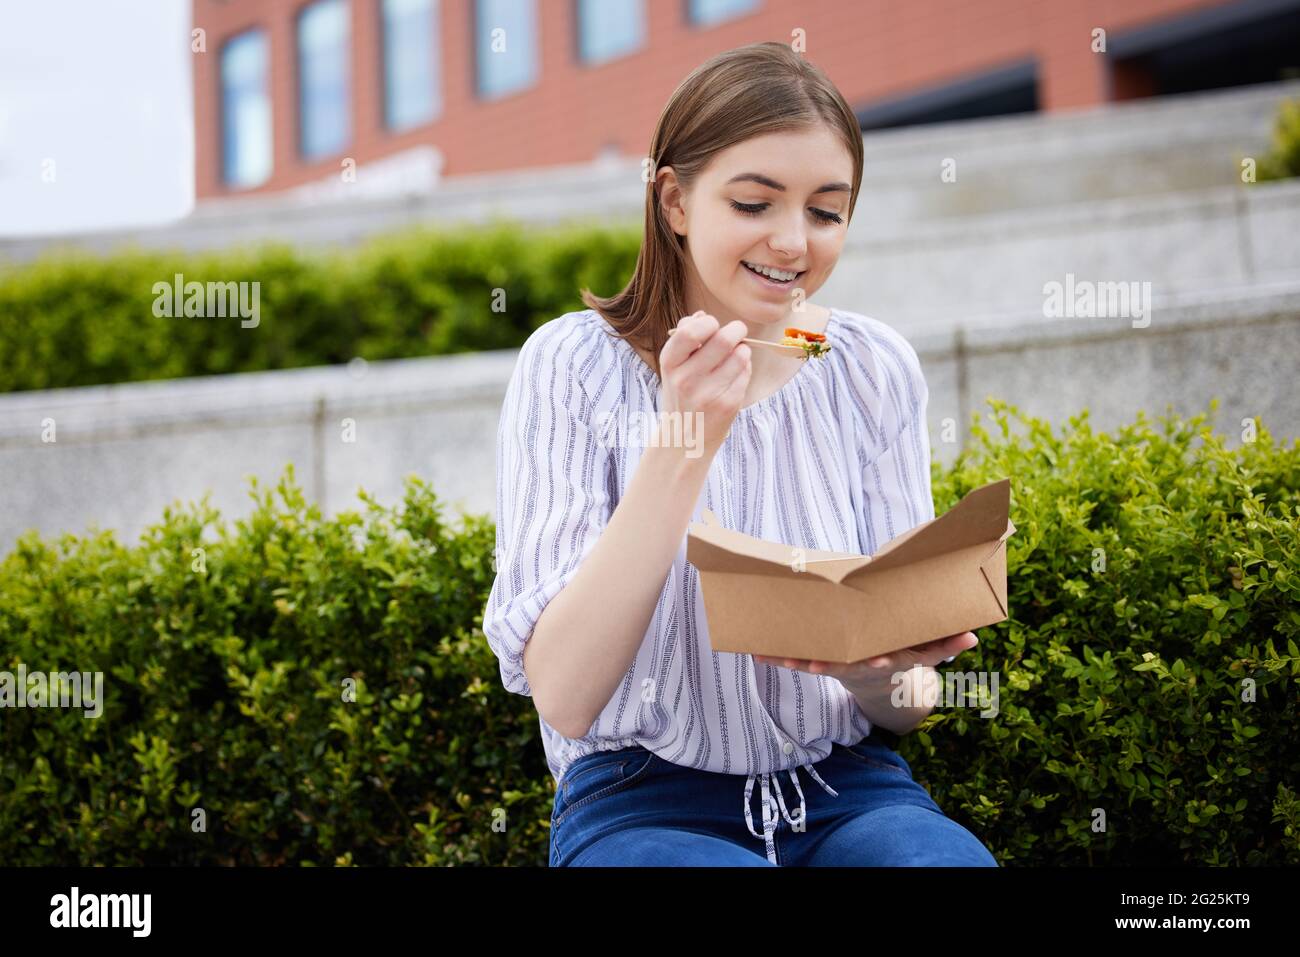 Woman Eating Healthy Vegan Or Vegetarian Takeaway Lunch From Recyclable Packaging With Wooden Fork Stock Photo